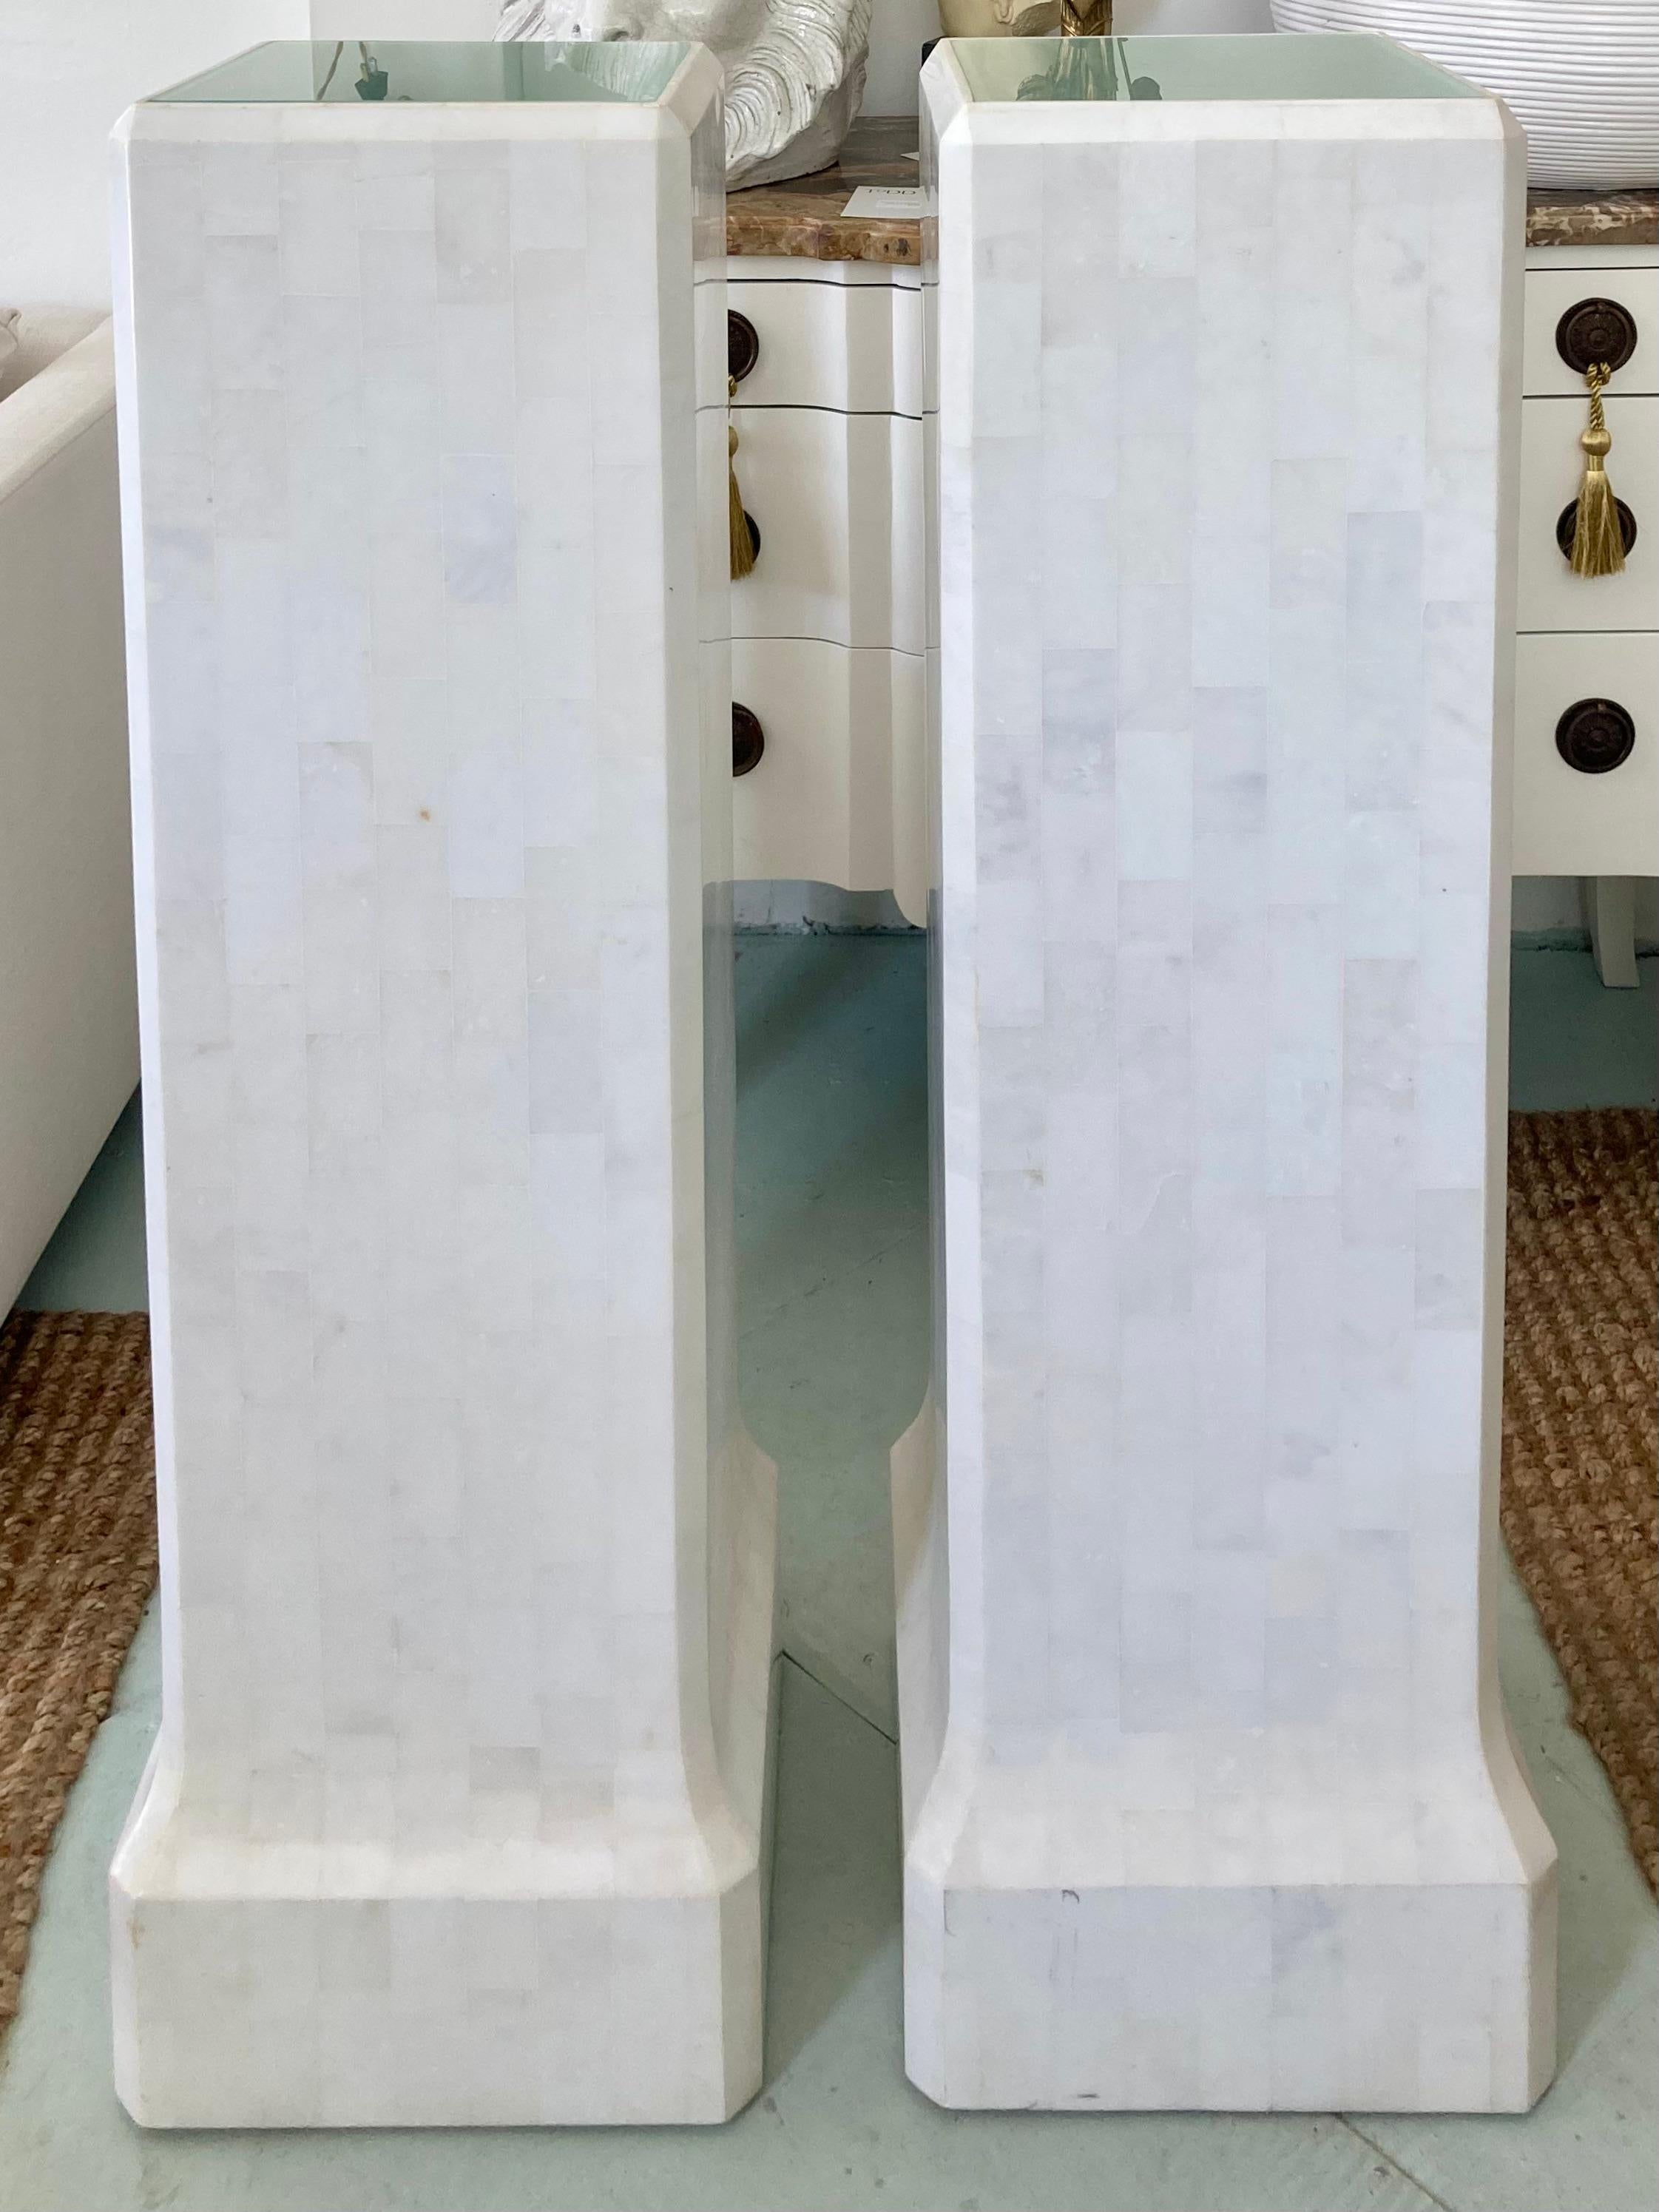 Beautiful pair of tessellated white marble pedestals with lighted surfaces. The detail work of the marble inlay is incredible. The detail at the base with the slightly flared surfaces adds to the design. Both pedestals are light up with electrical